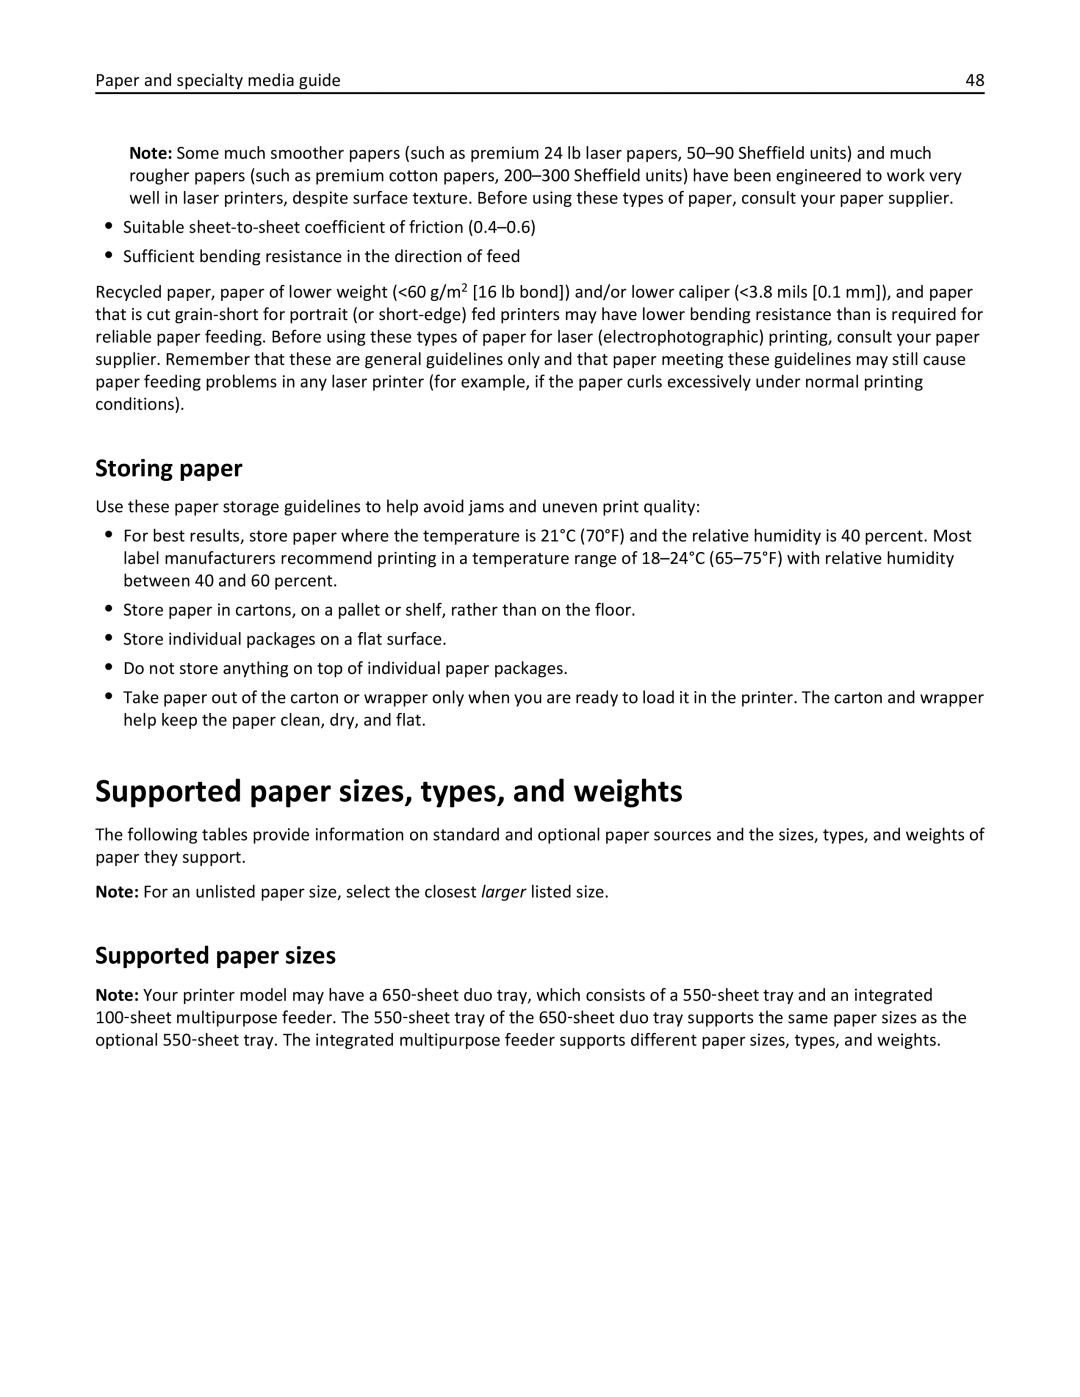 Lexmark CS410 manual Supported paper sizes, types, and weights, Storing paper 